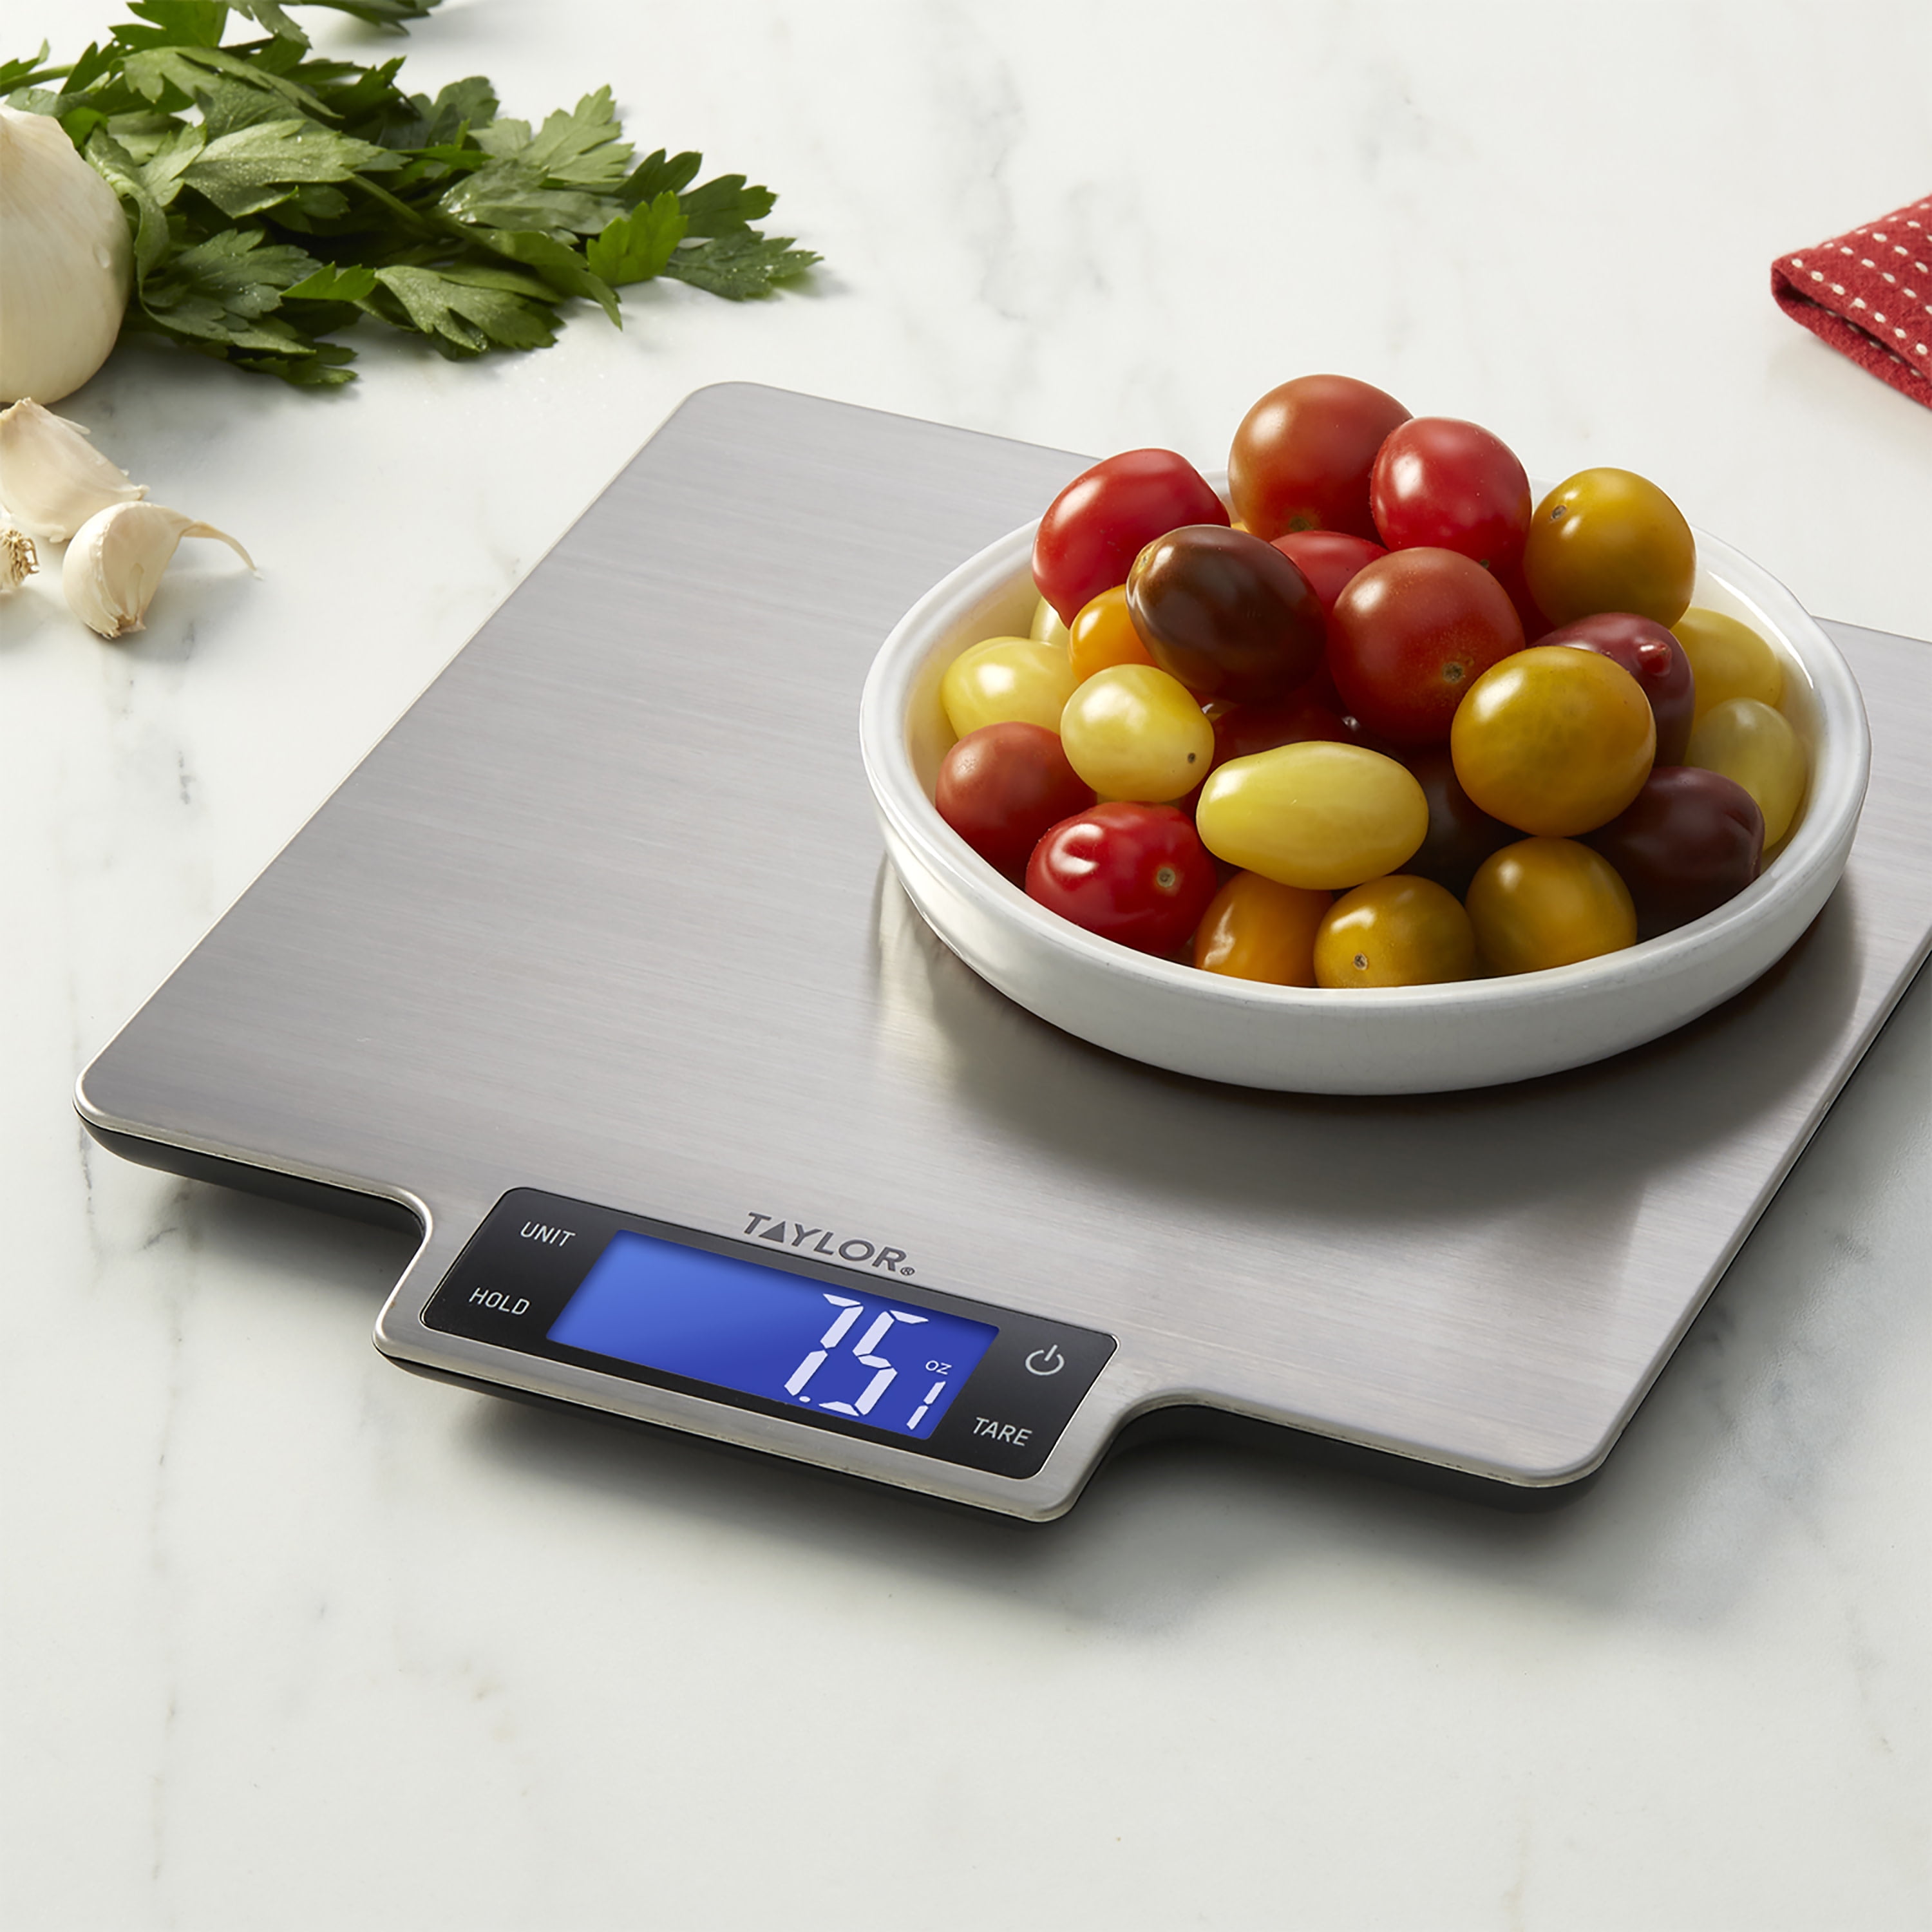 Taylor 22lb High Capacity Kitchen Food Scale with Stainless Steel Surface, Backlit Display, and USB Recharging Cord Included, White